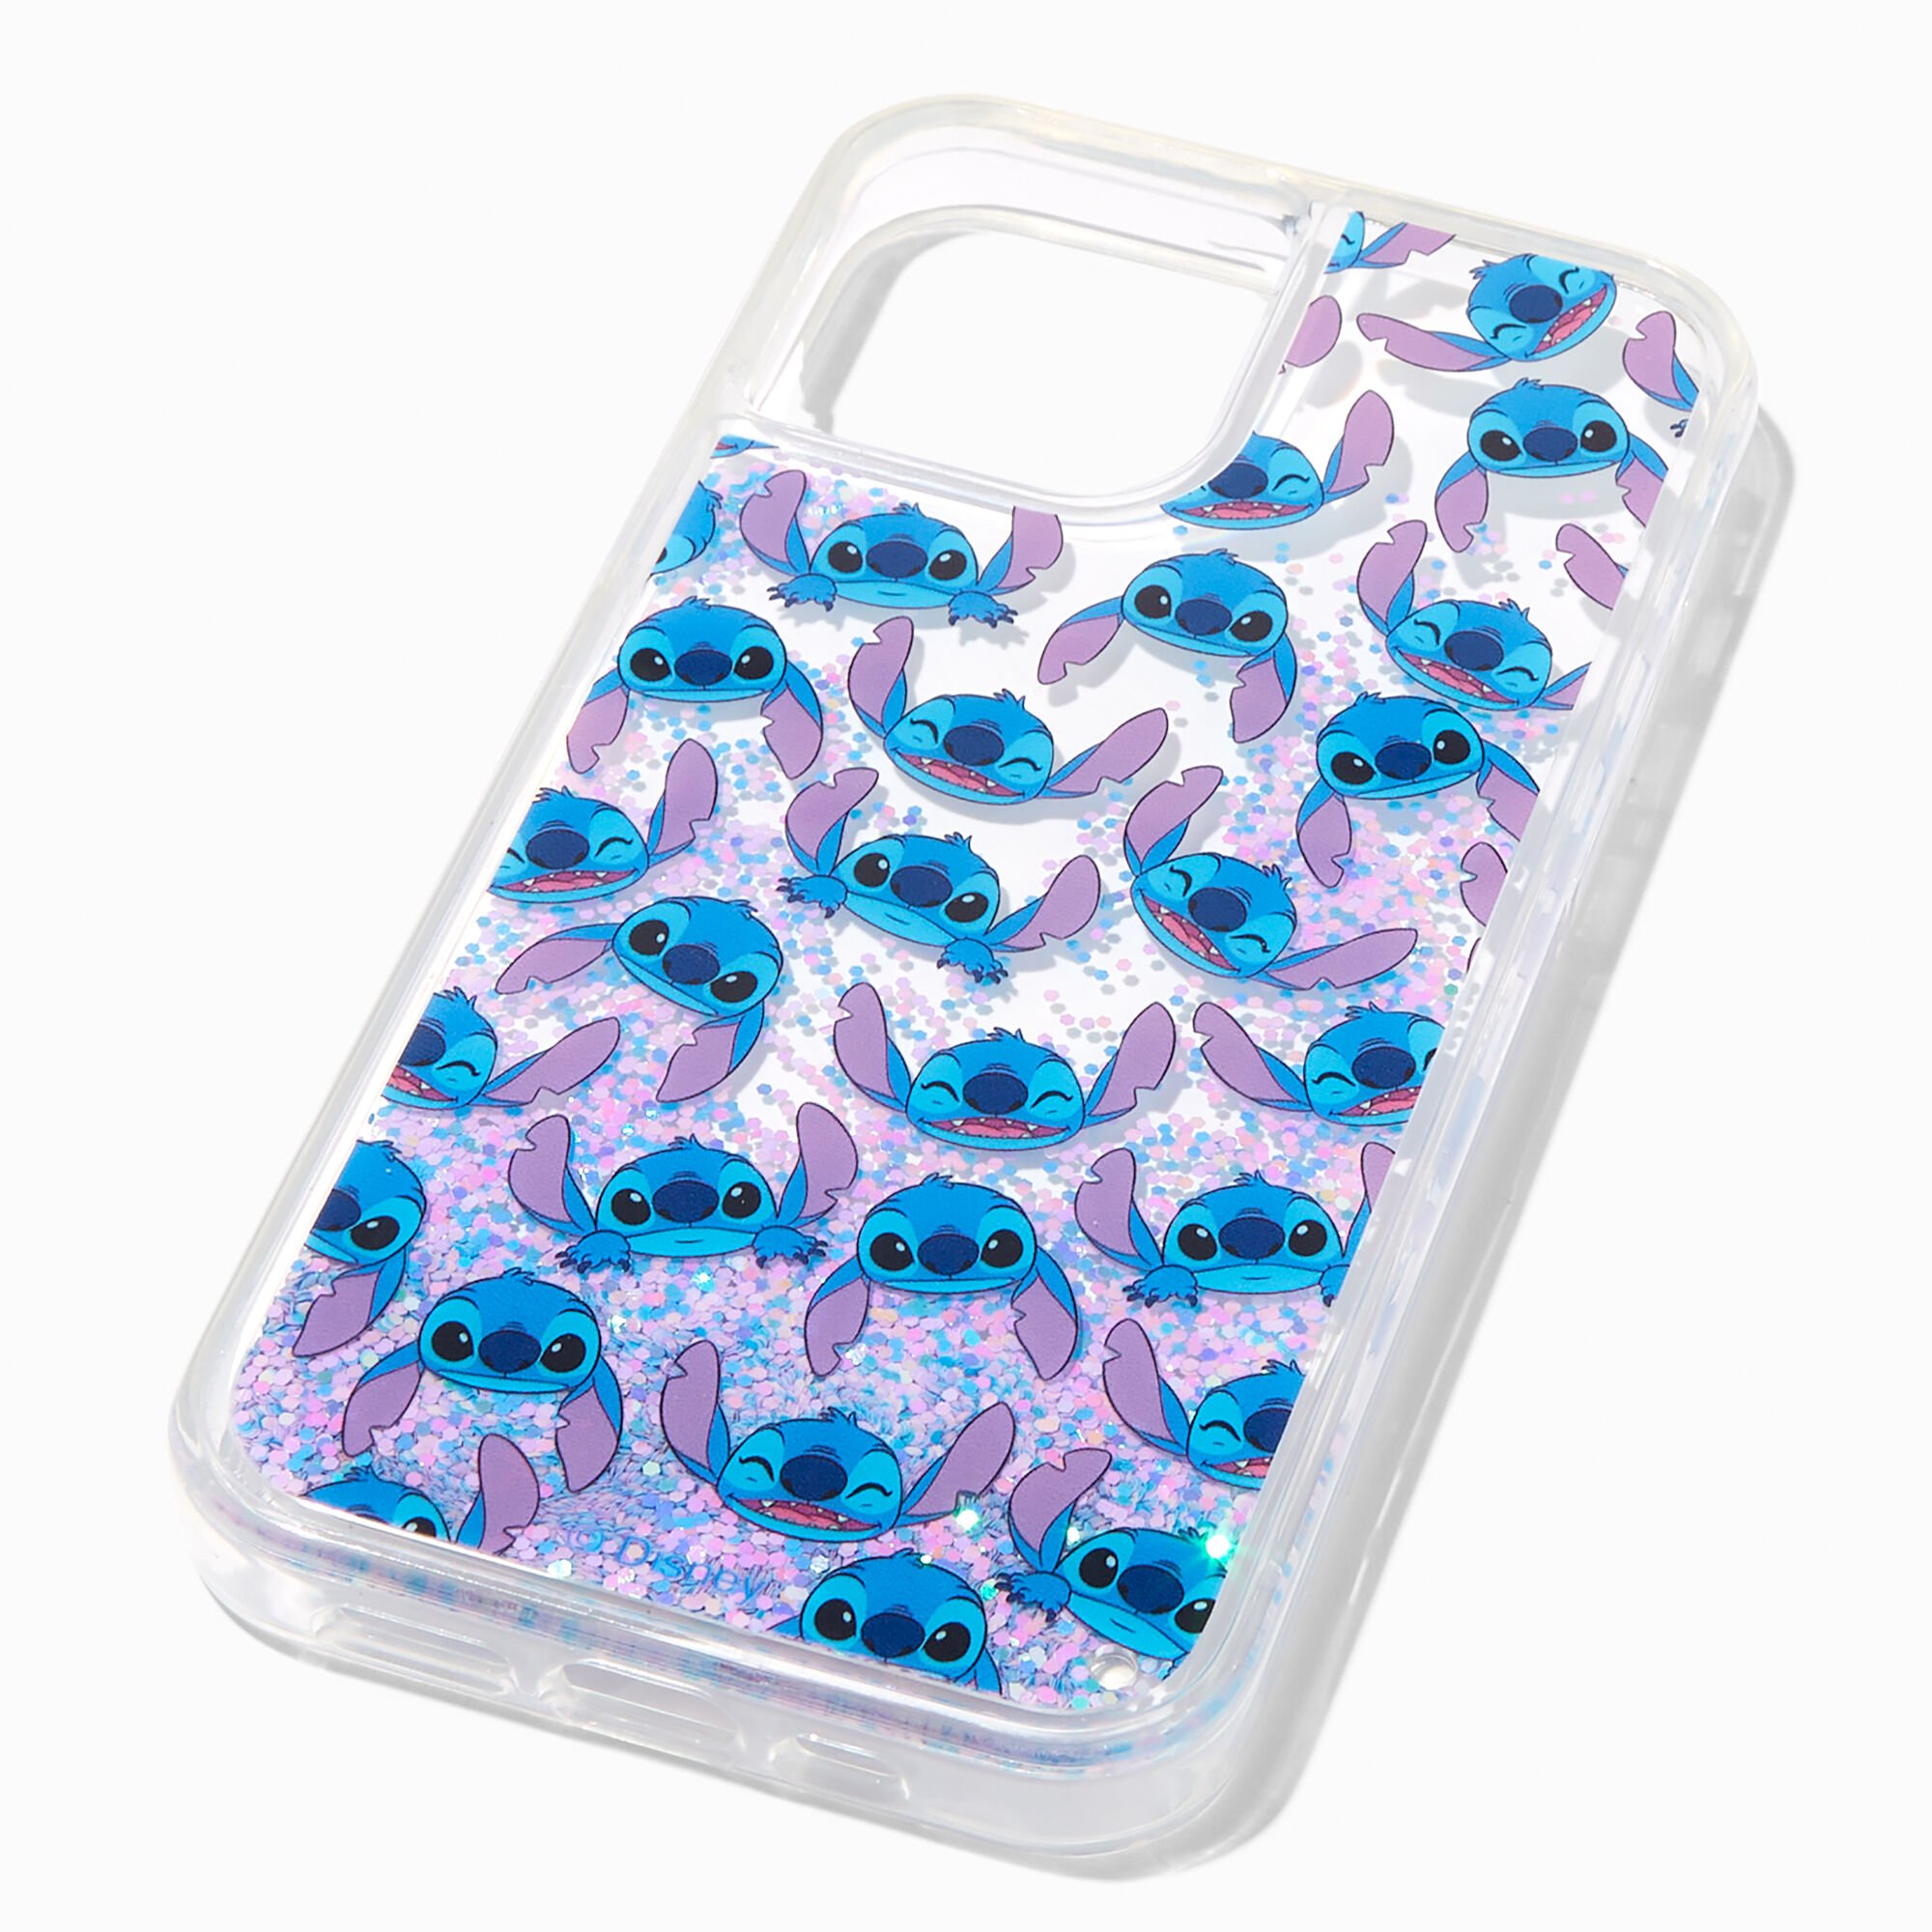 View Claires Disney Stitch Protective Phone Case Fits Iphone 12 Pro information